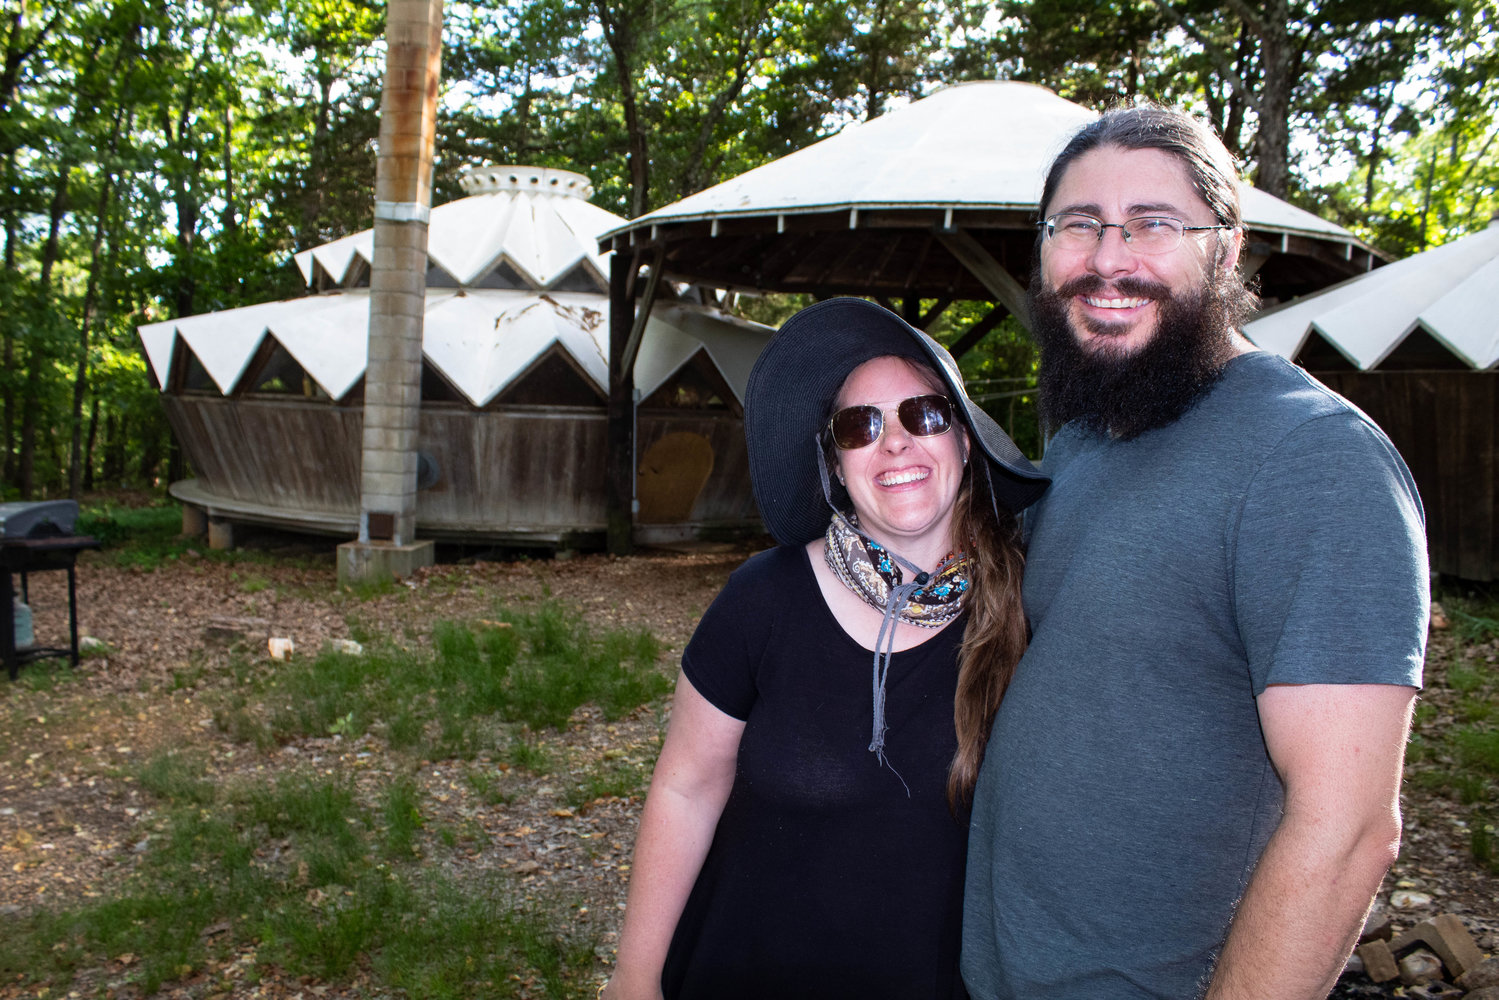 Amanda and Nick Francis show off the trio of yurts that are rentable on Airbnb.